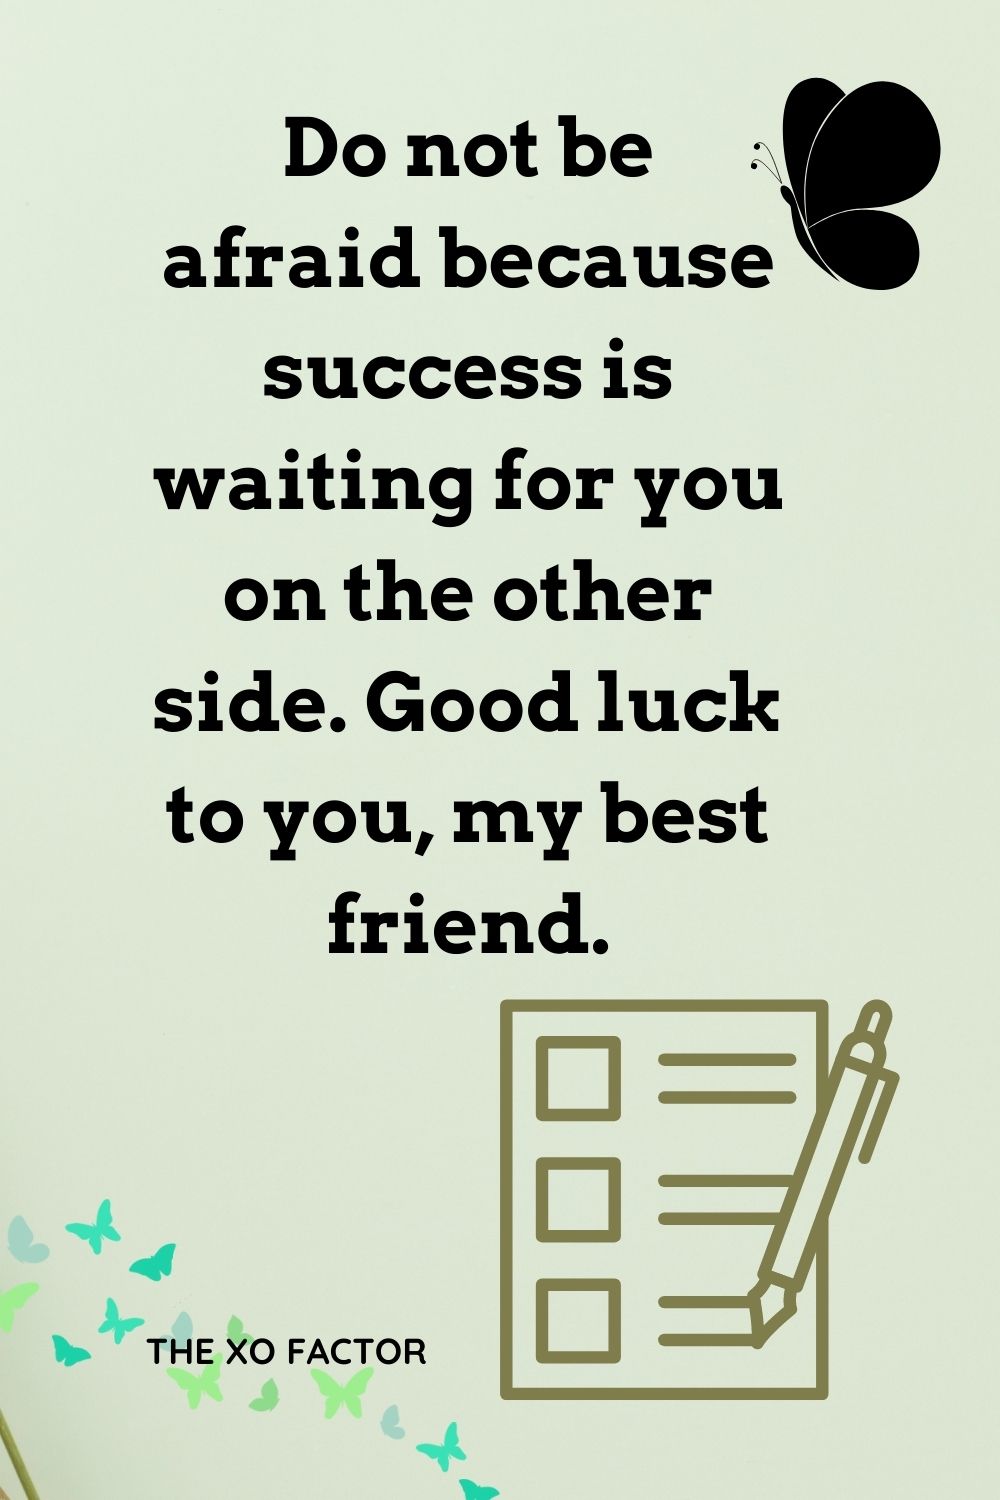 Do not be afraid because success is waiting for you on the other side. Good luck to you, my best friend.